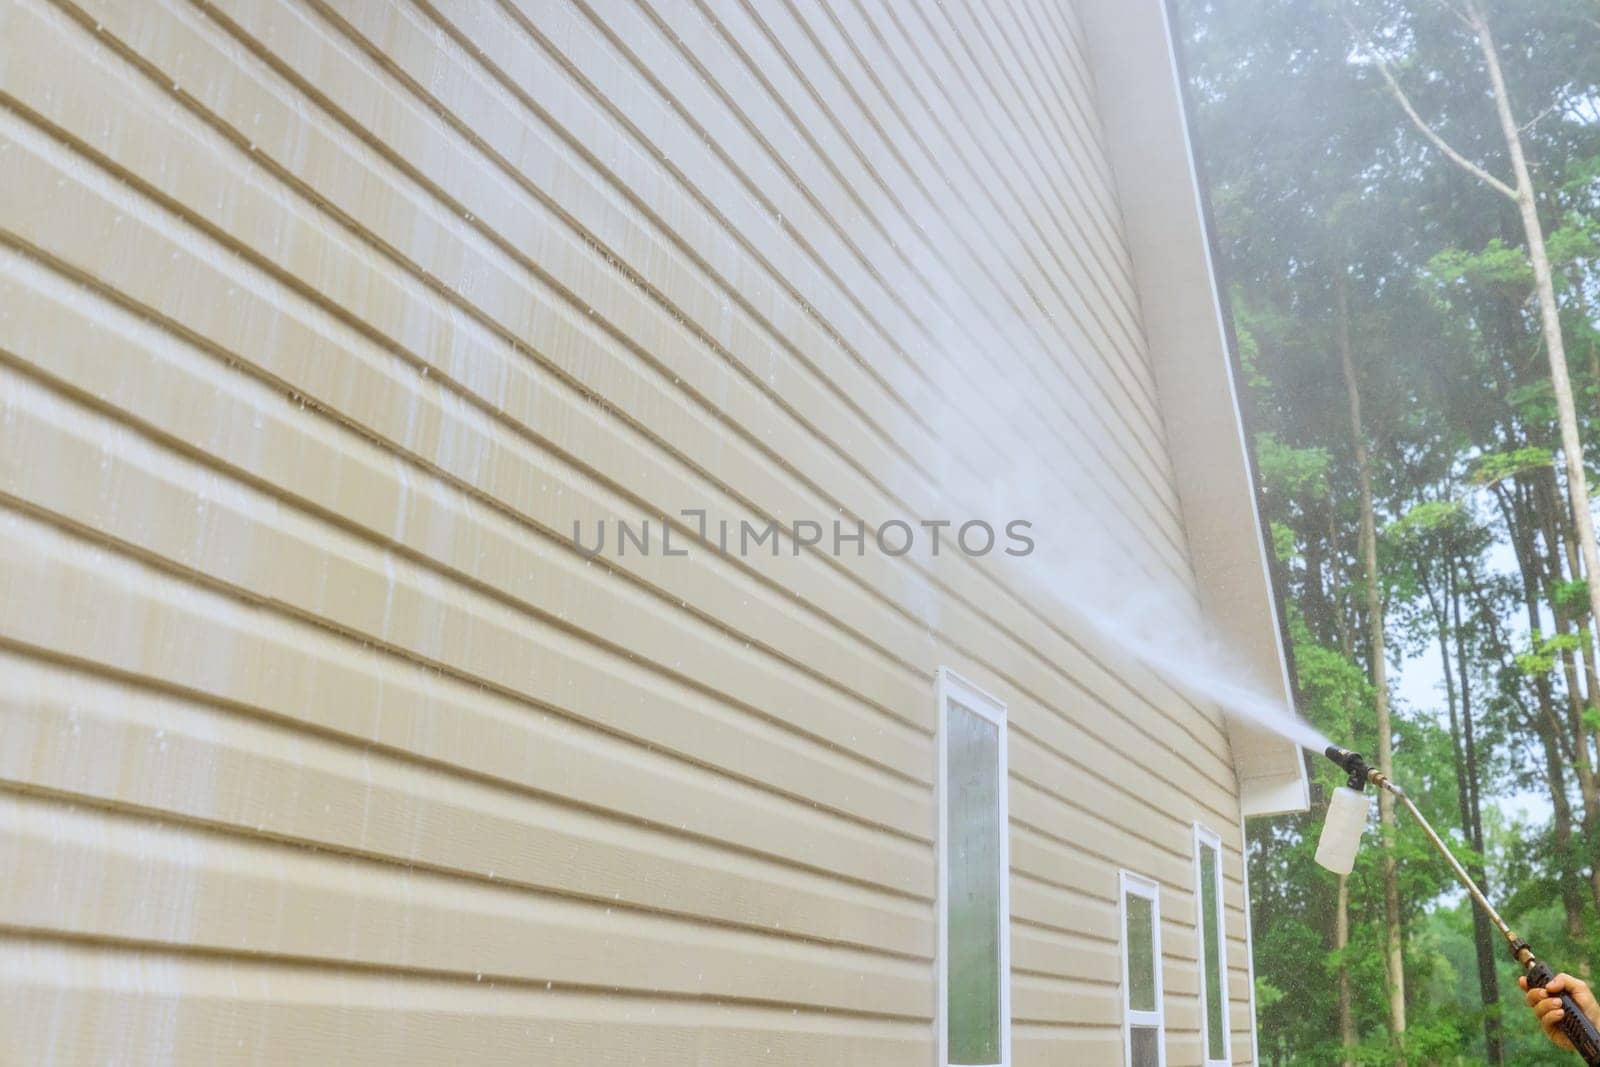 Service worker utilizes high pressure nozzles to efficiently clean siding houses with water soap cleaner.